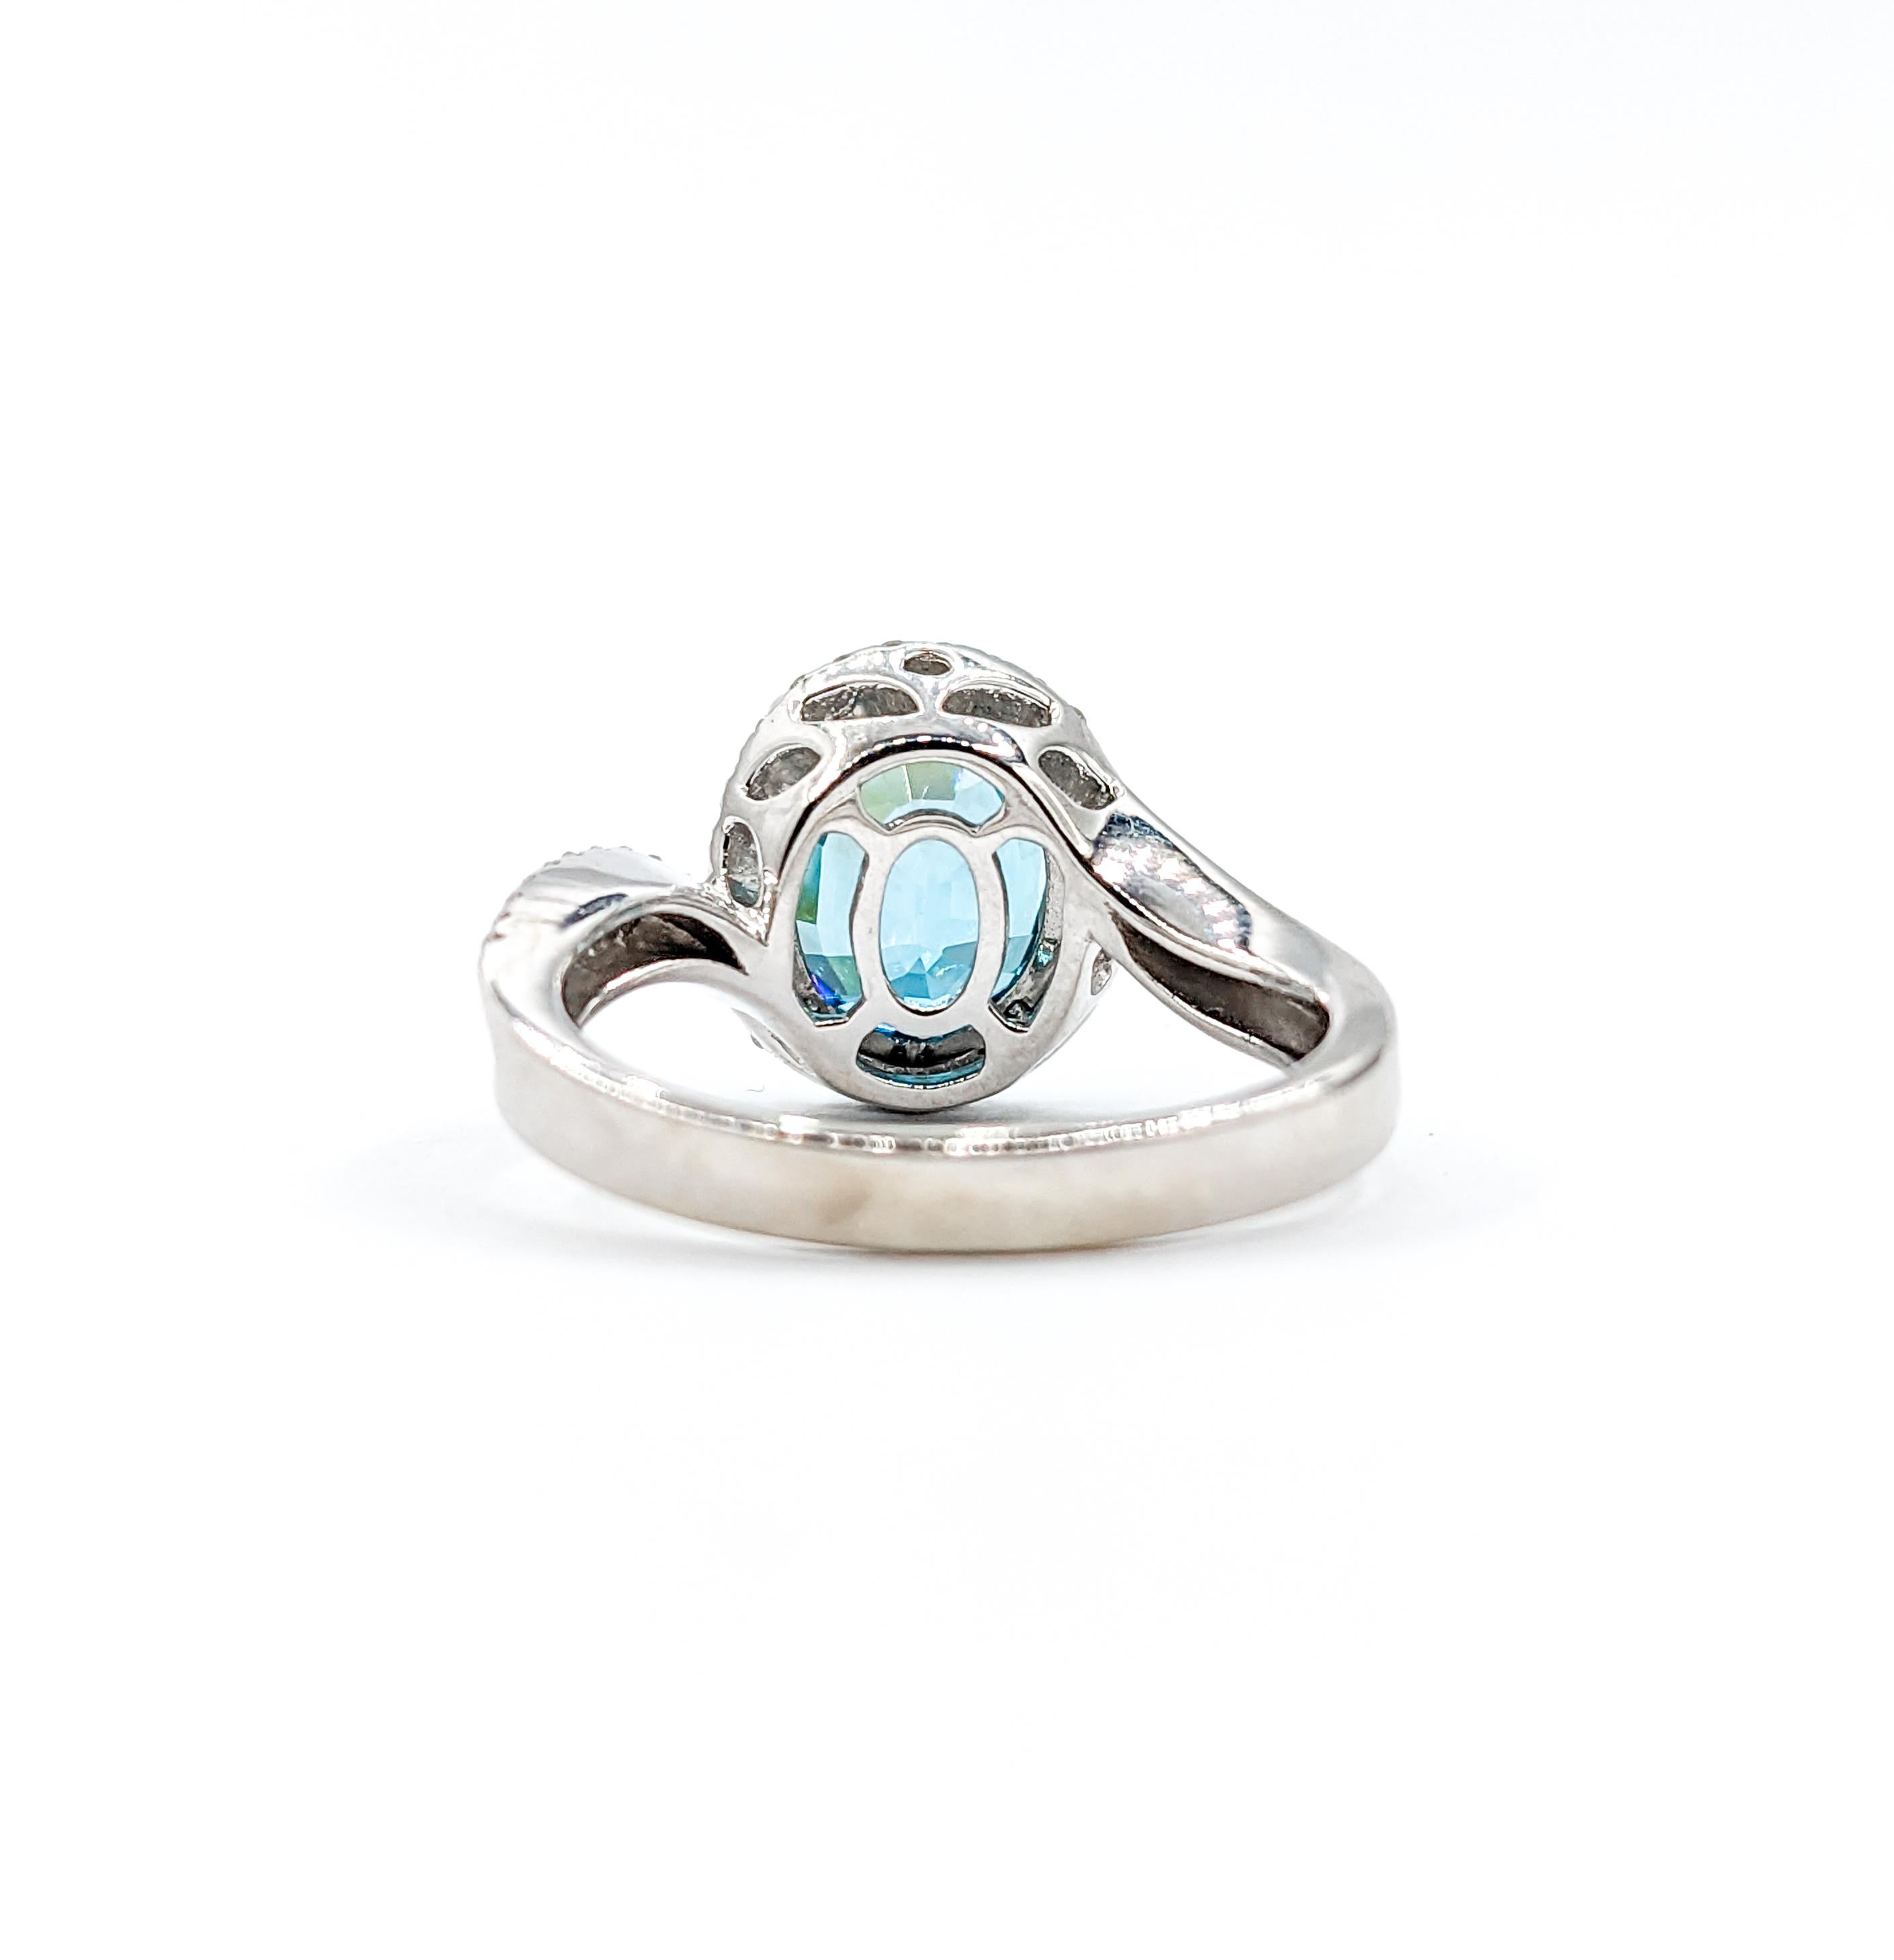 5.0ct Blue Zircon & Diamond Ring In White Gold For Sale 2